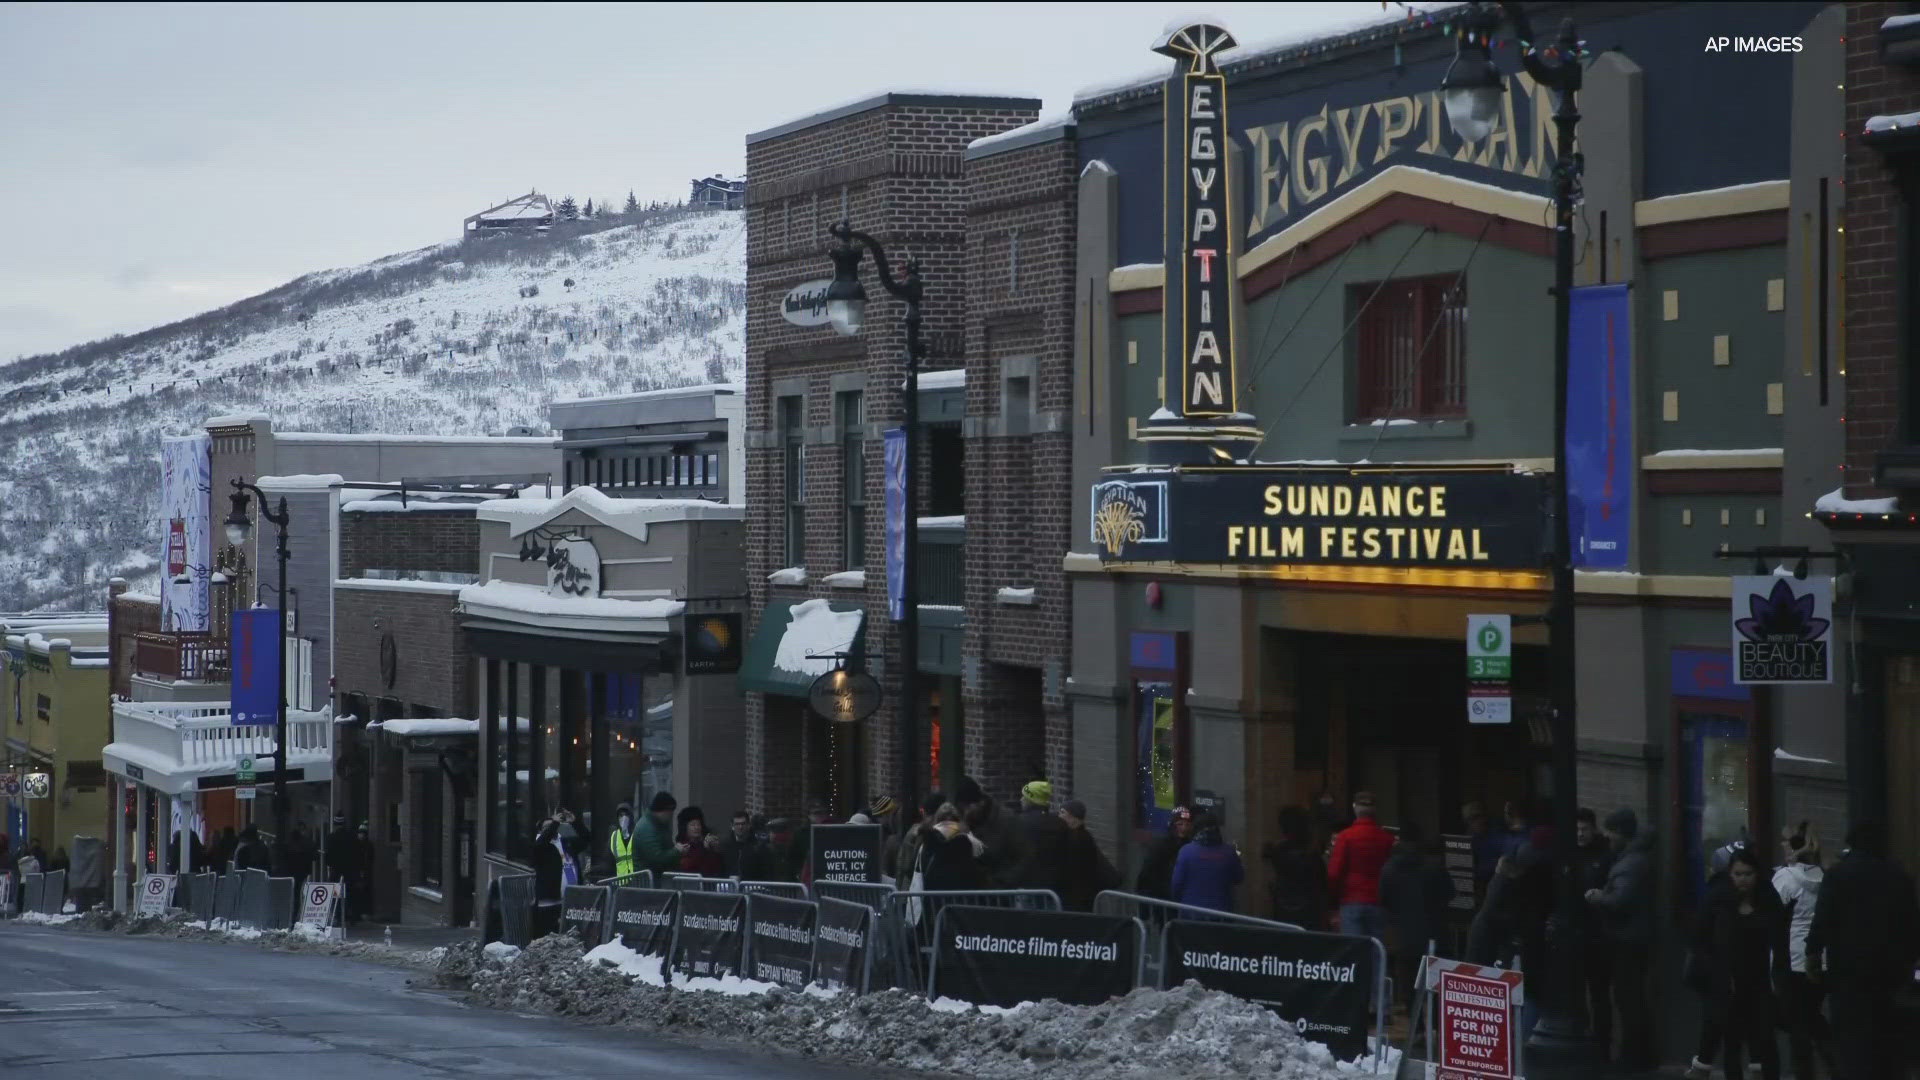 The city intends to put in a bid after Sundance announced its intentions to expand.